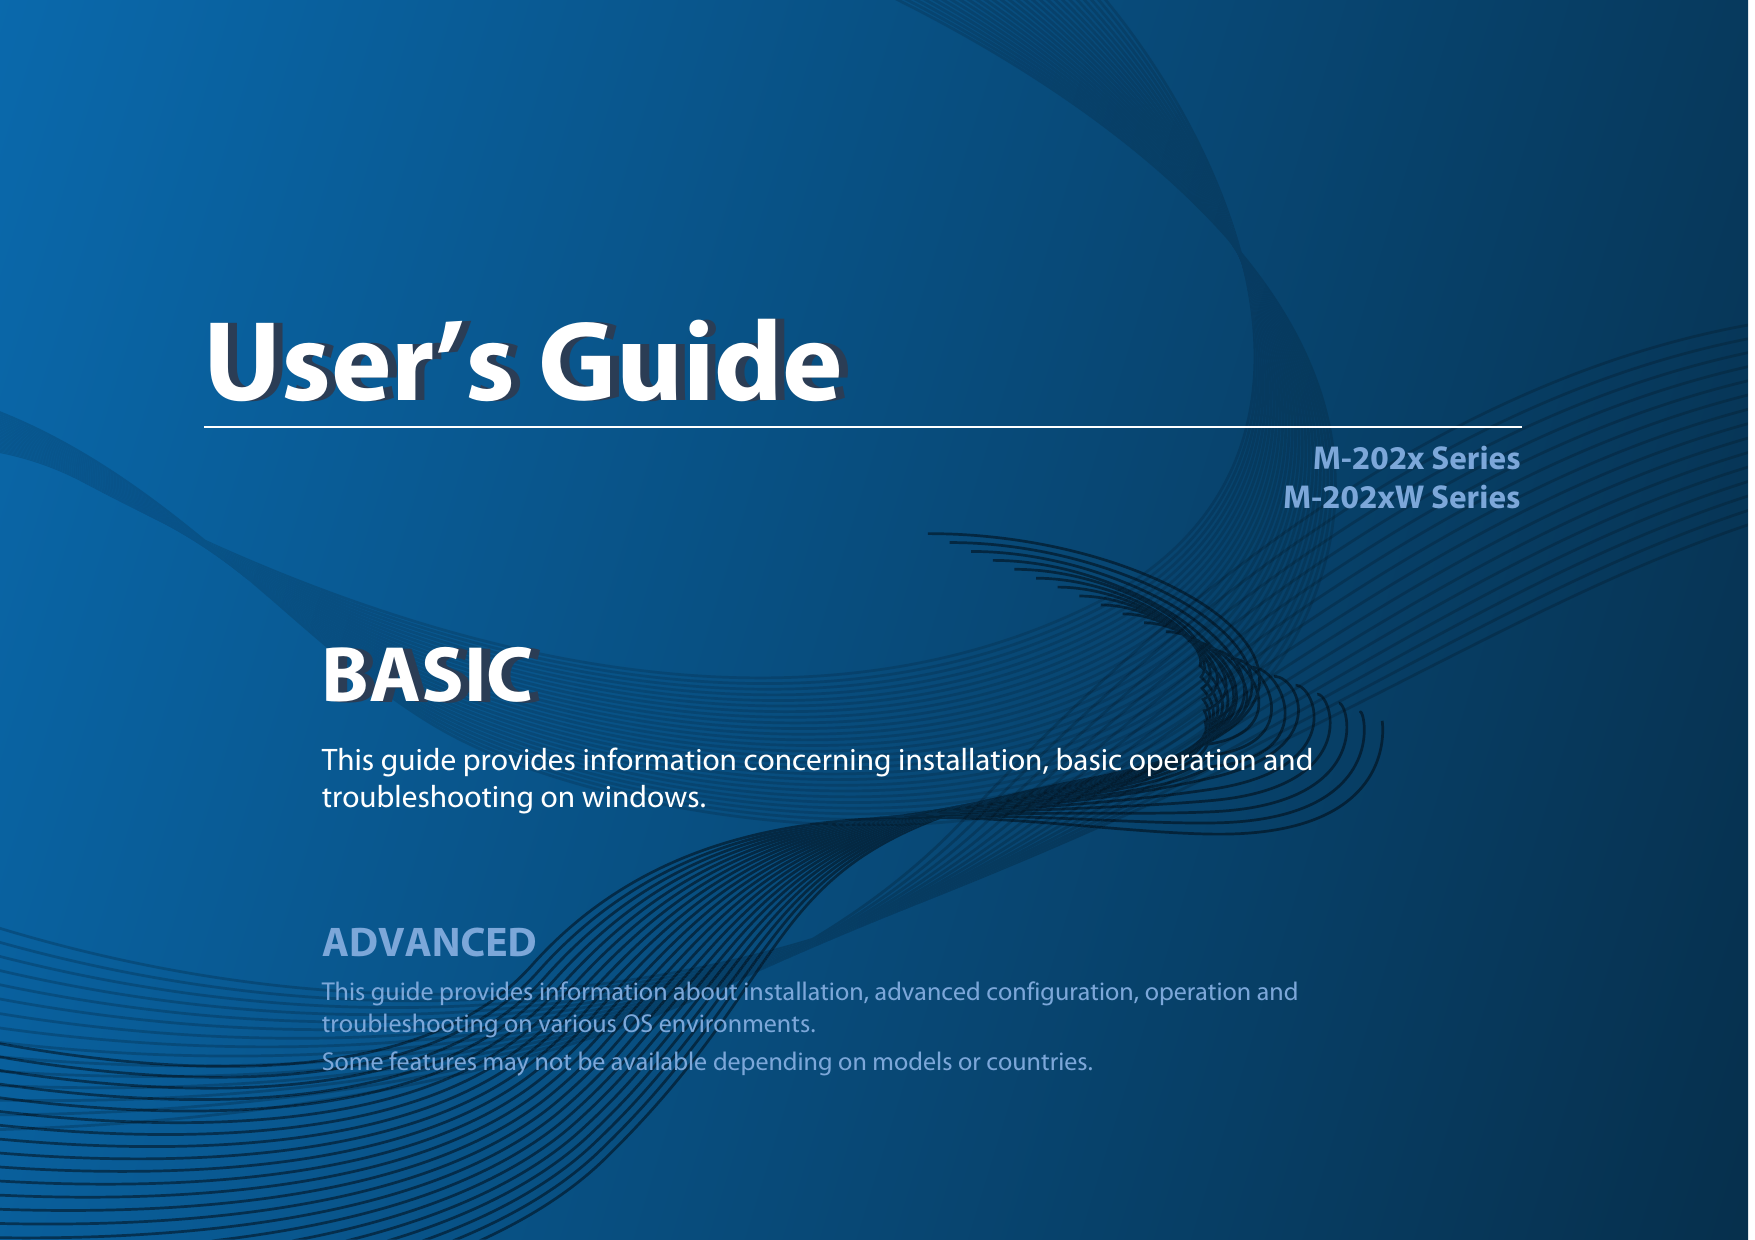 BASICUser’s GuideM-202x SeriesM-202xW SeriesBASICUser’s GuideThis guide provides information concerning installation, basic operation and troubleshooting on windows.ADVANCEDThis guide provides information about installation, advanced configuration, operation and troubleshooting on various OS environments. Some features may not be available depending on models or countries.